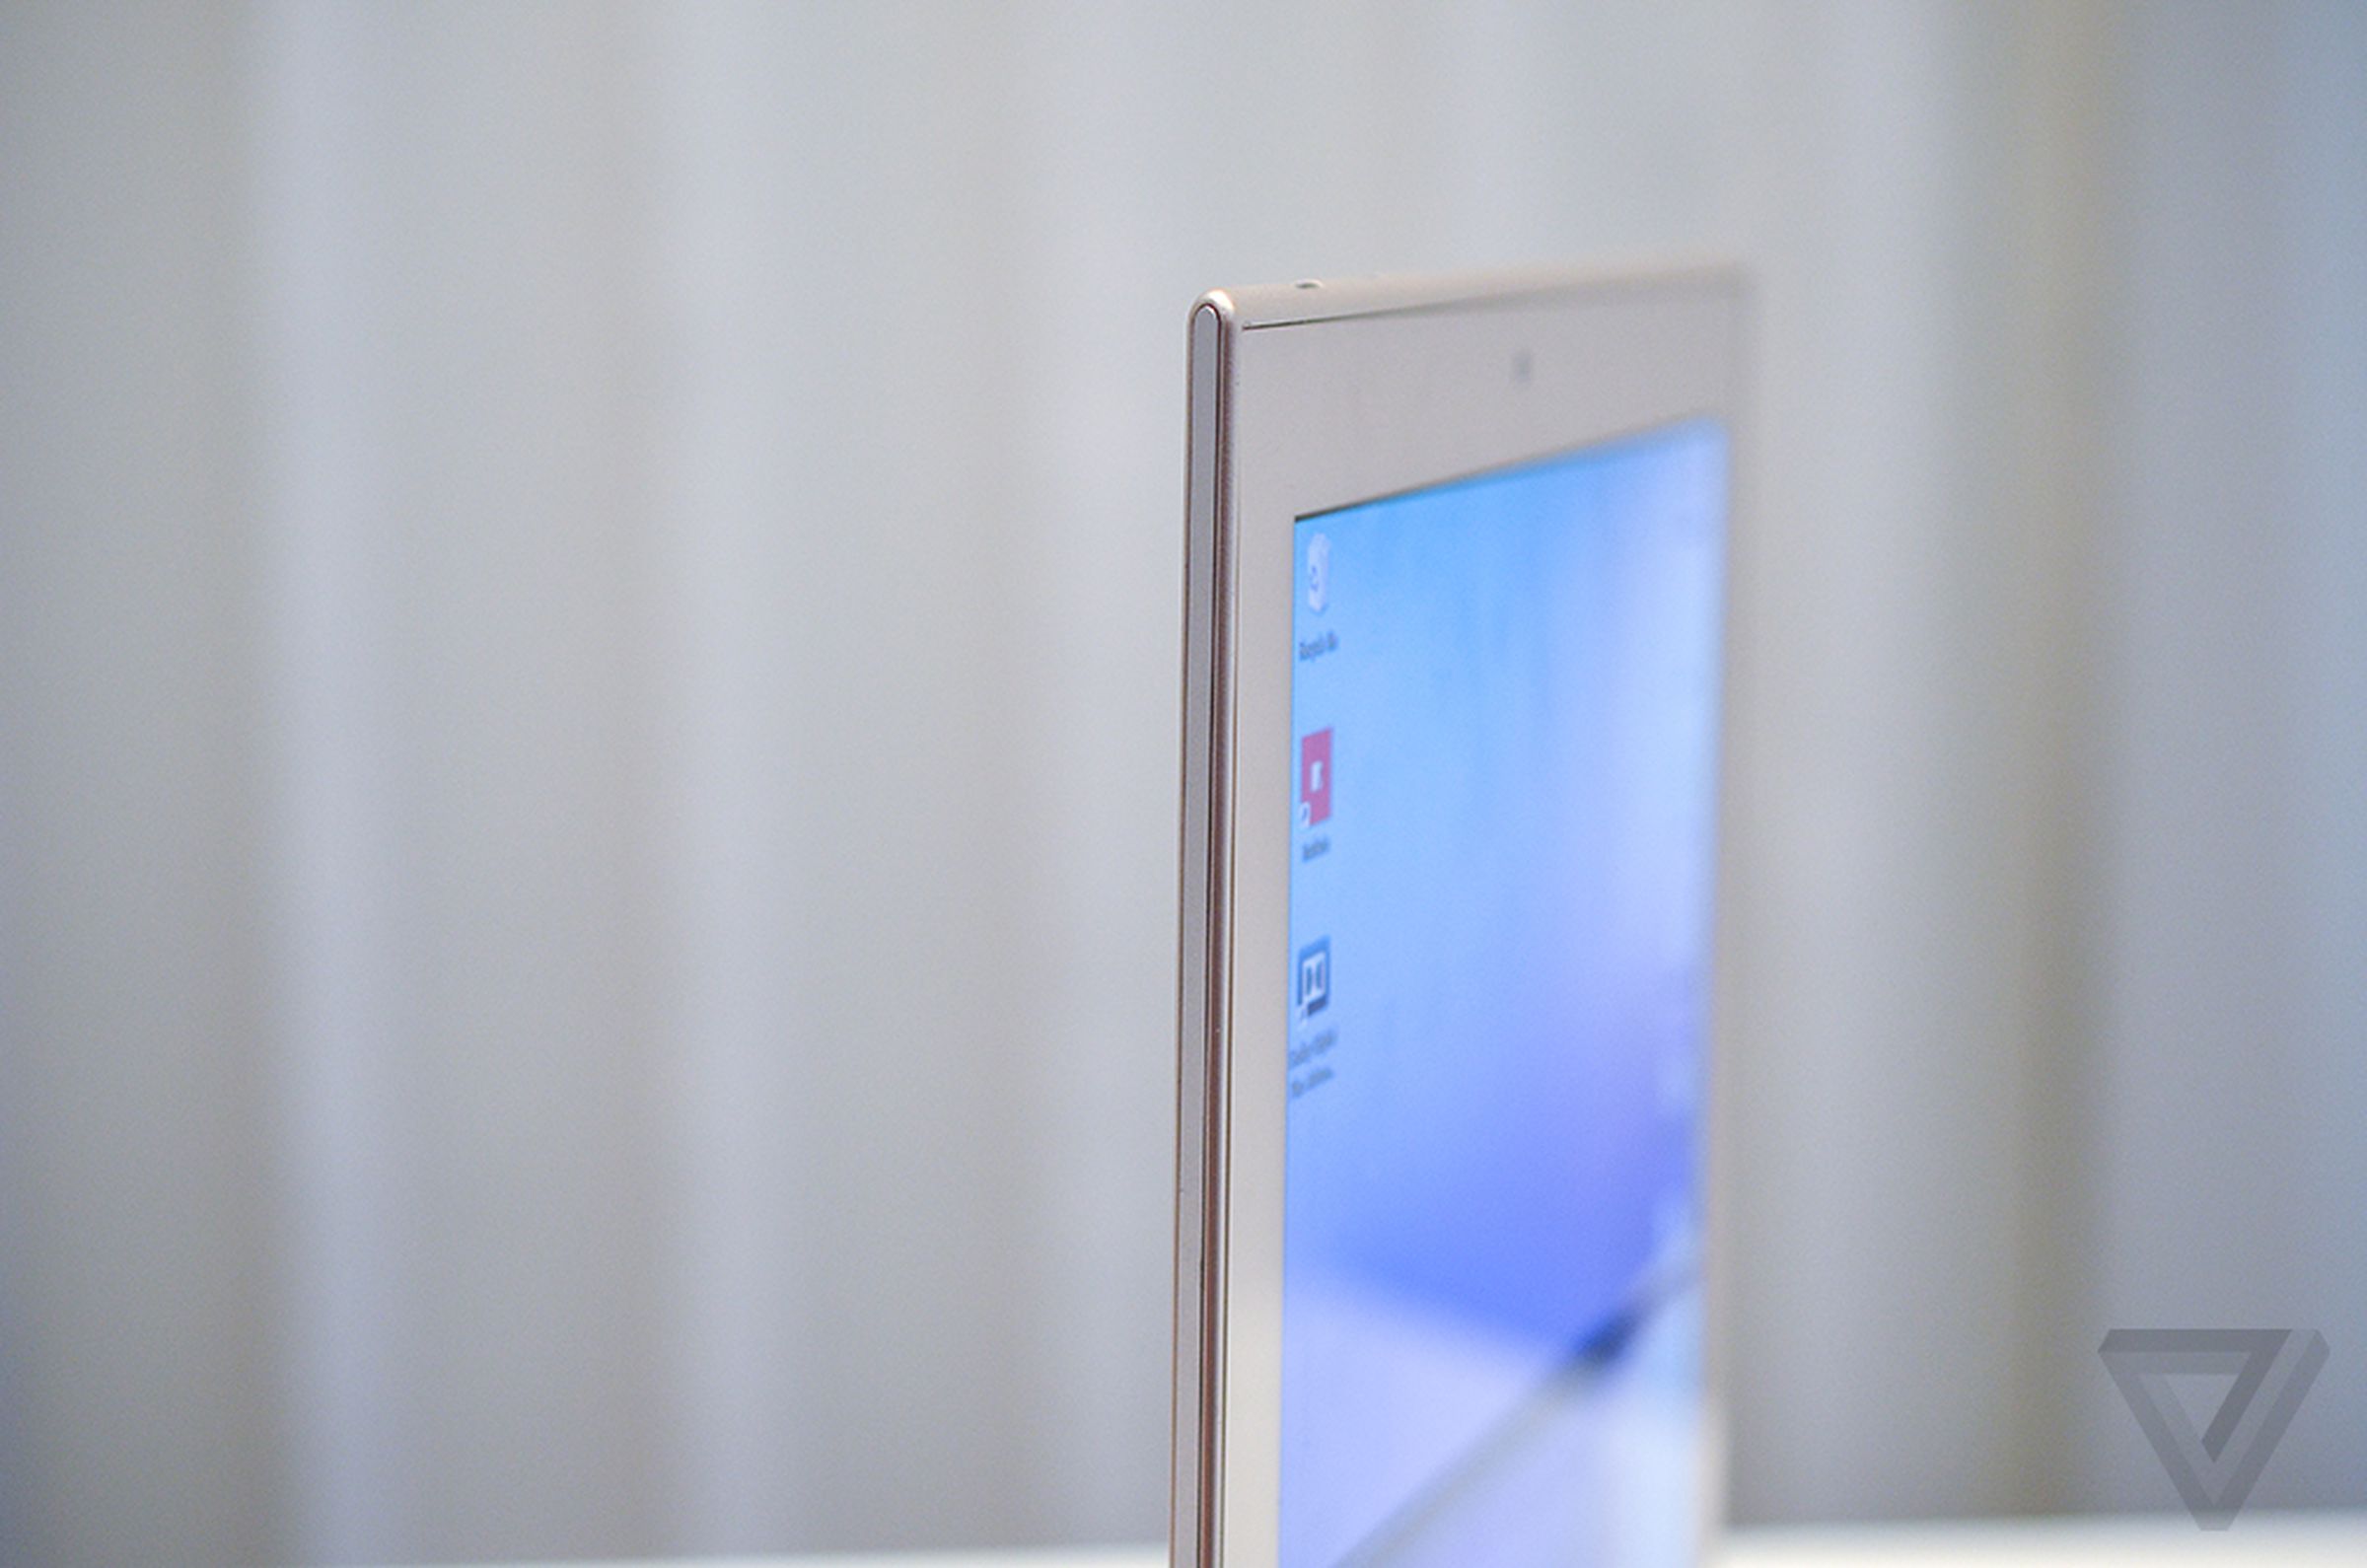 Toshiba concept tablet hands-on photos